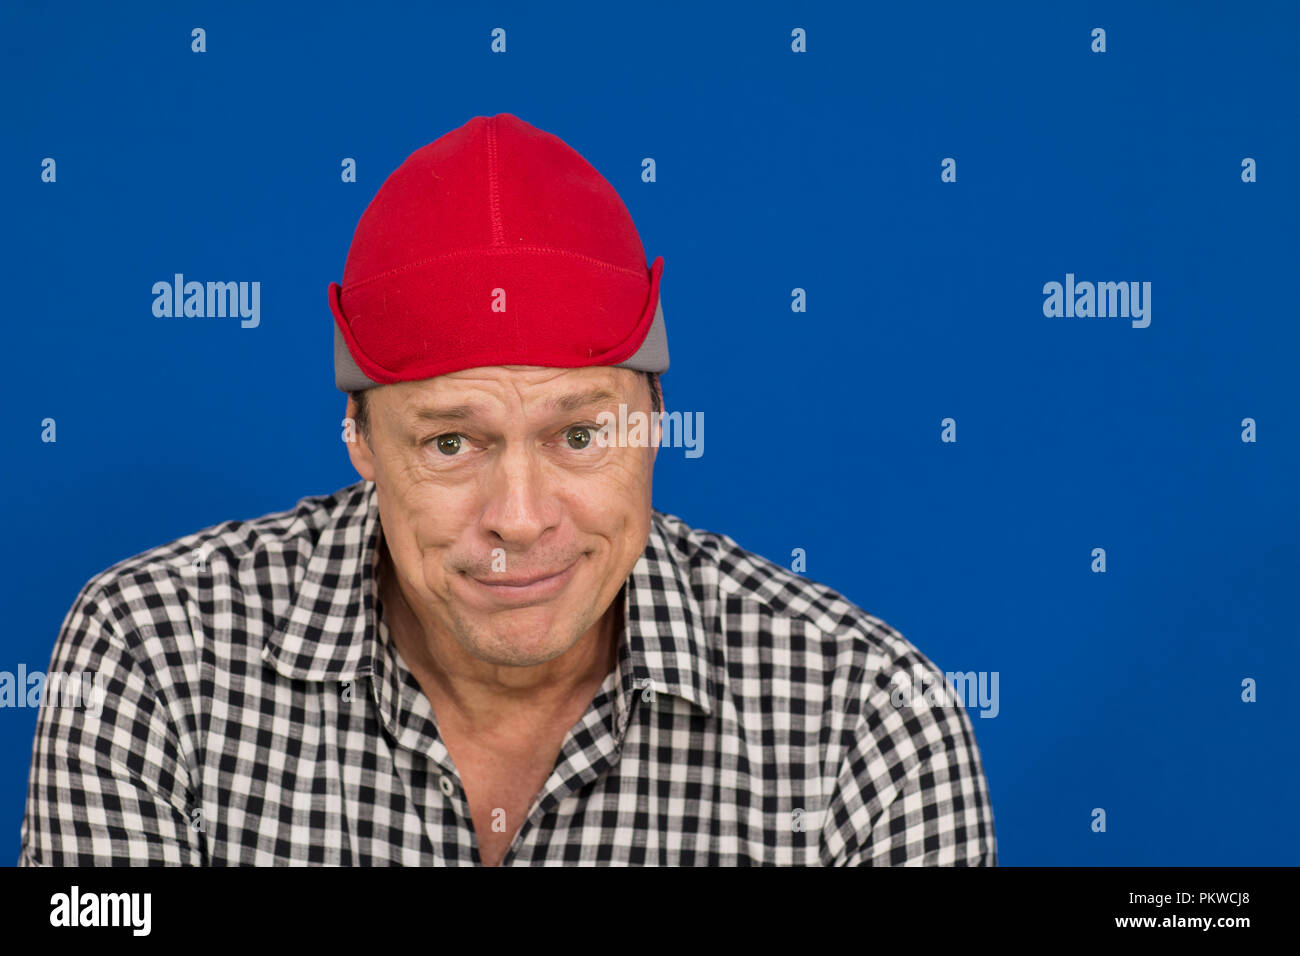 Man with red hat and plaid shirt, black and white and one half smile on his face Stock Photo